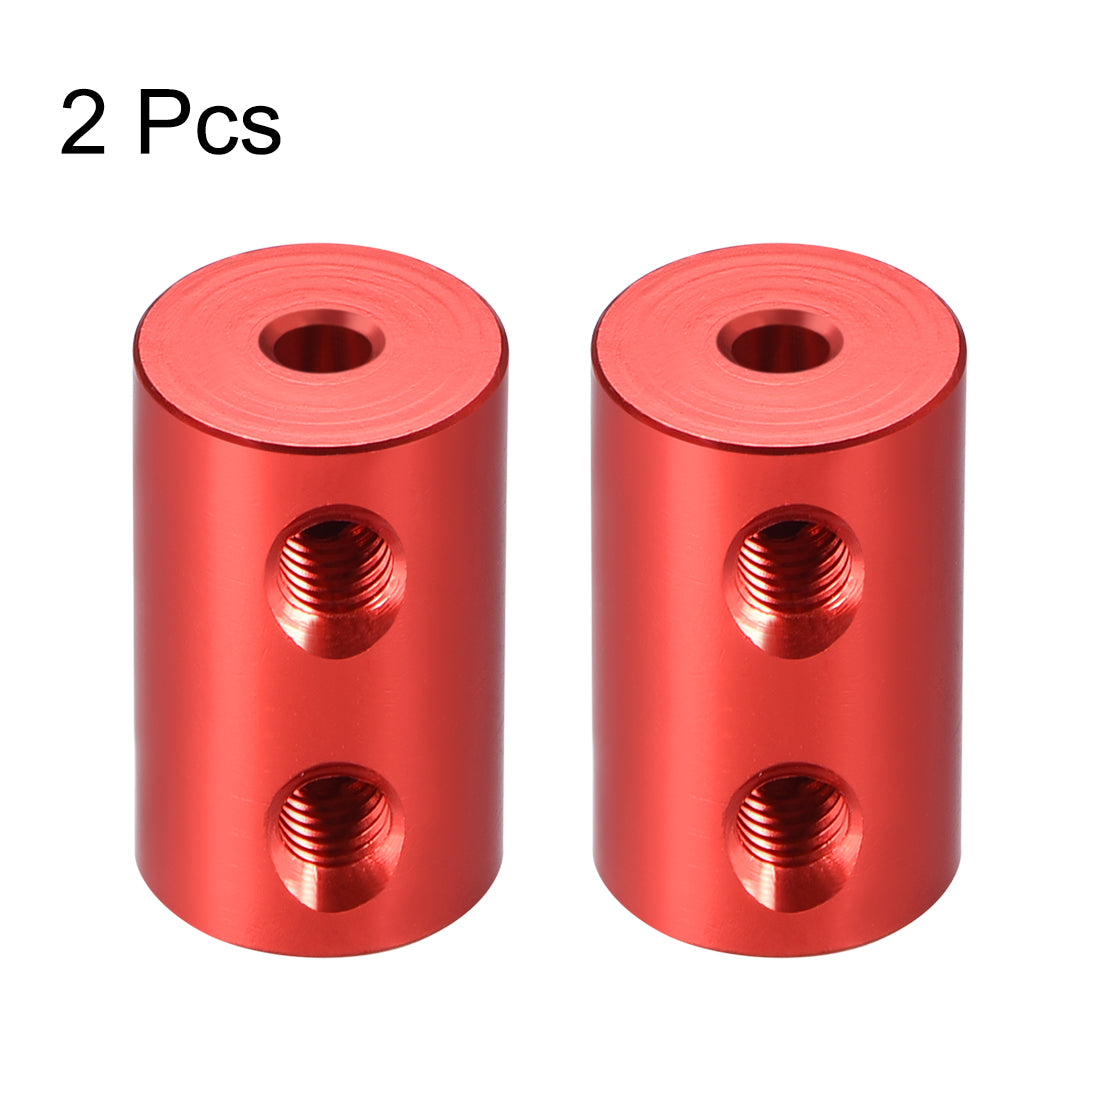 uxcell Uxcell Shaft Coupling 3mm to 3mm Bore L20xD12 Robot Motor Wheel Rigid Coupler Connector Red 2 Pcs